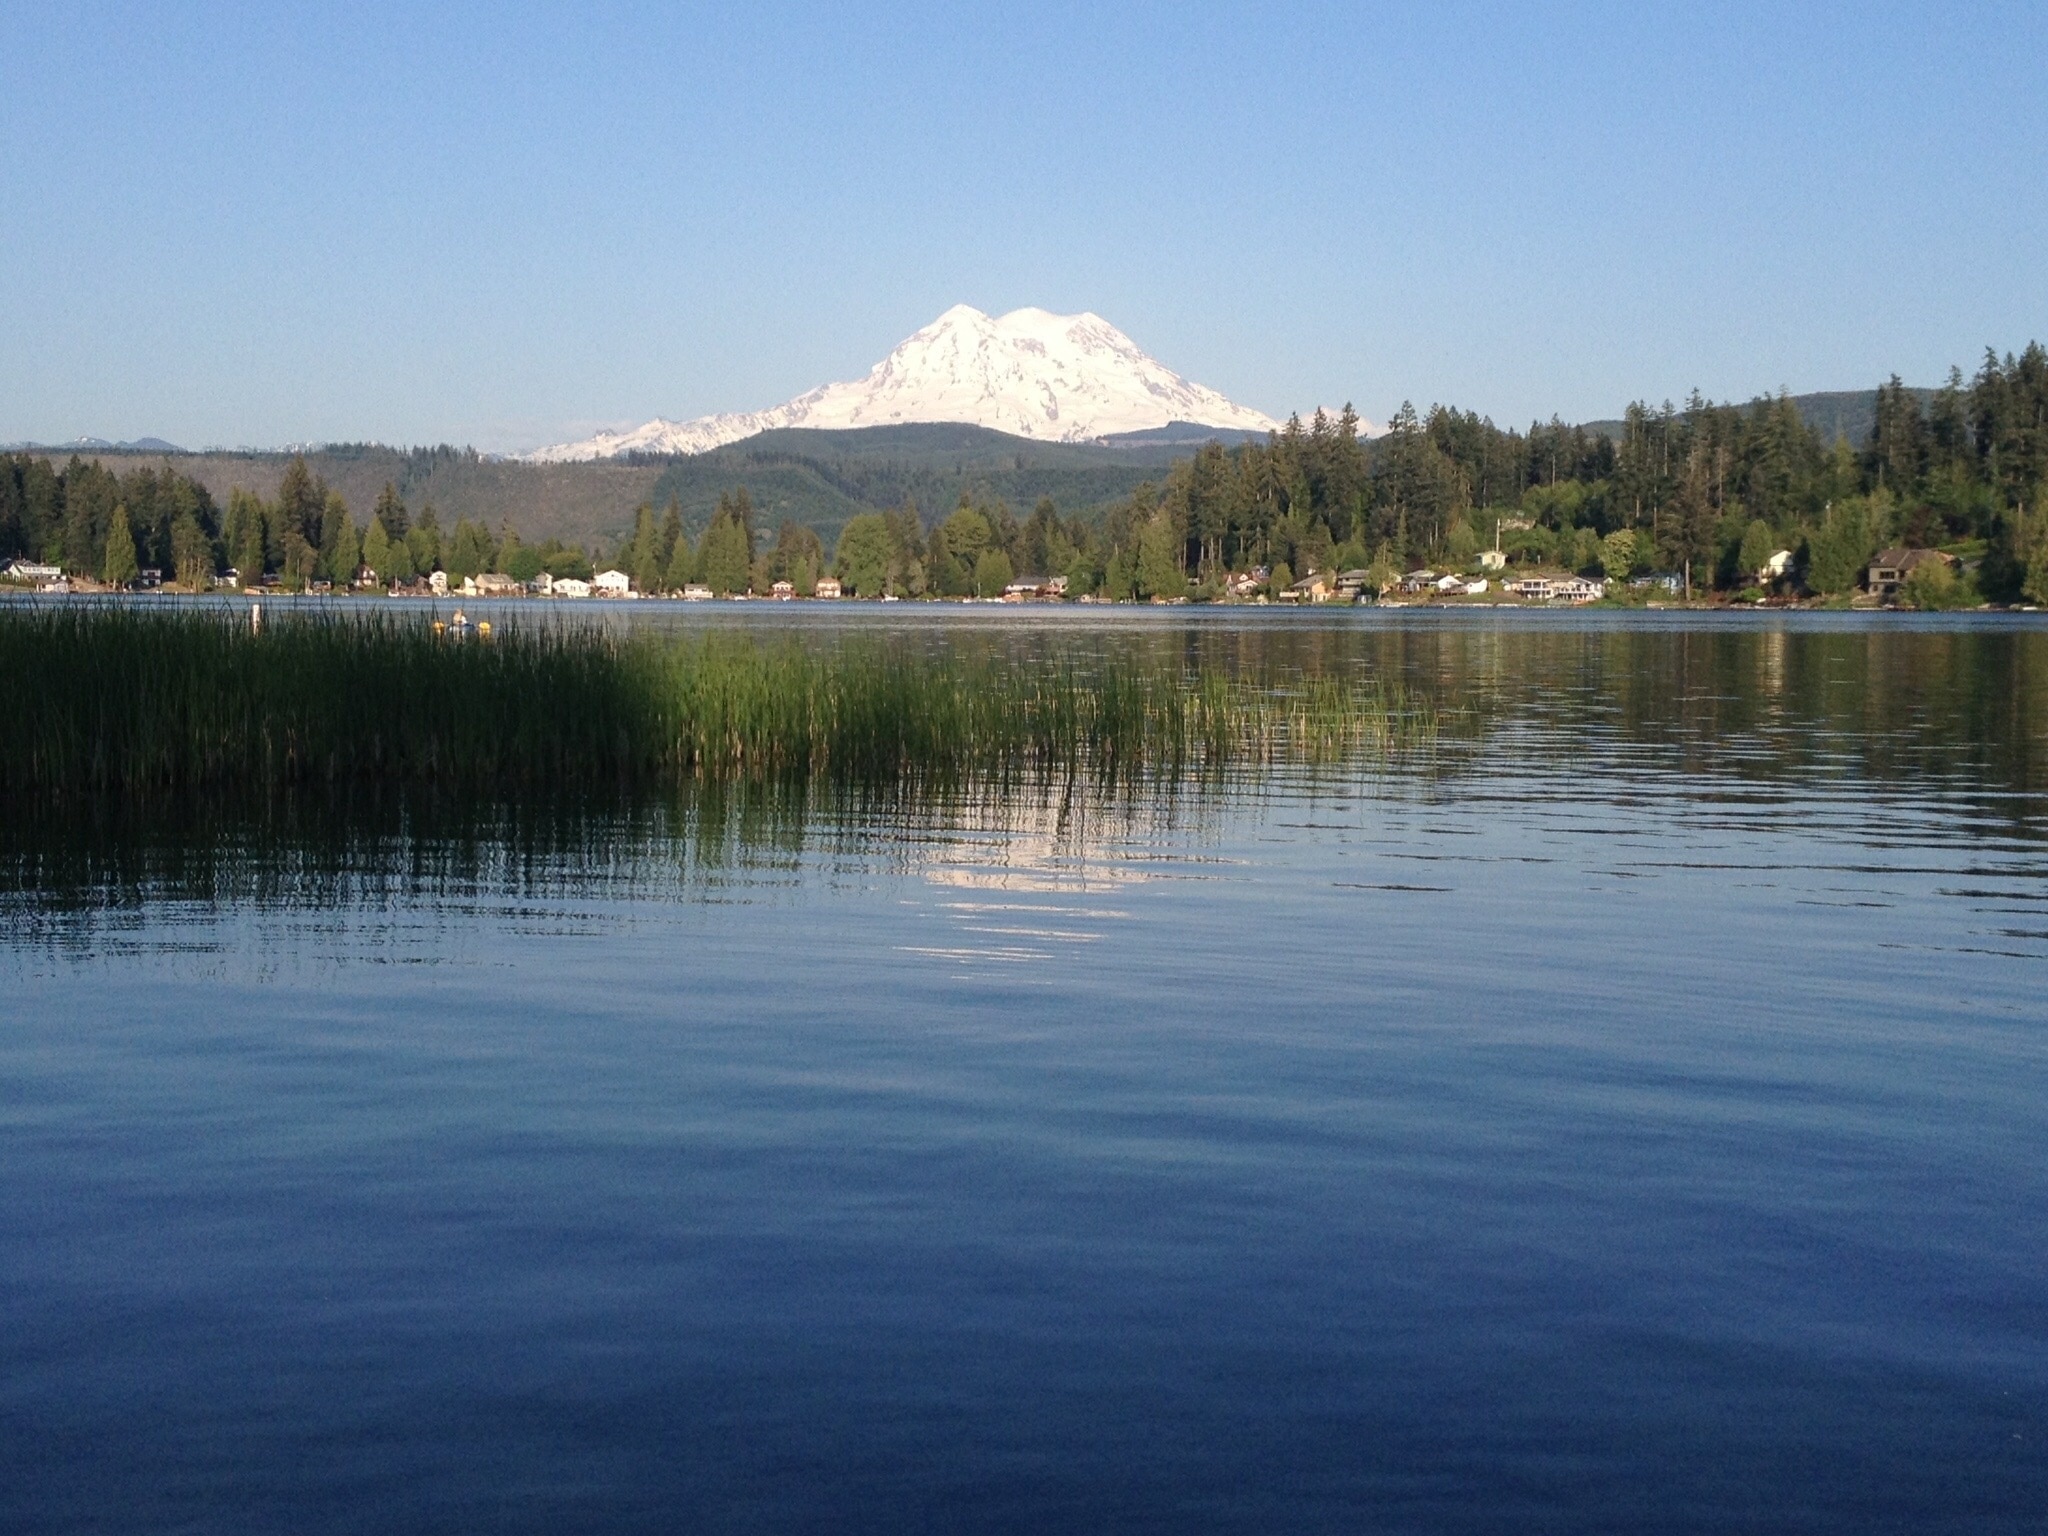 Lots of lakes at the foothills of Mt Rainier! Maybe a bit of fishing? #mountains #reflections #green #lifeatexpedia